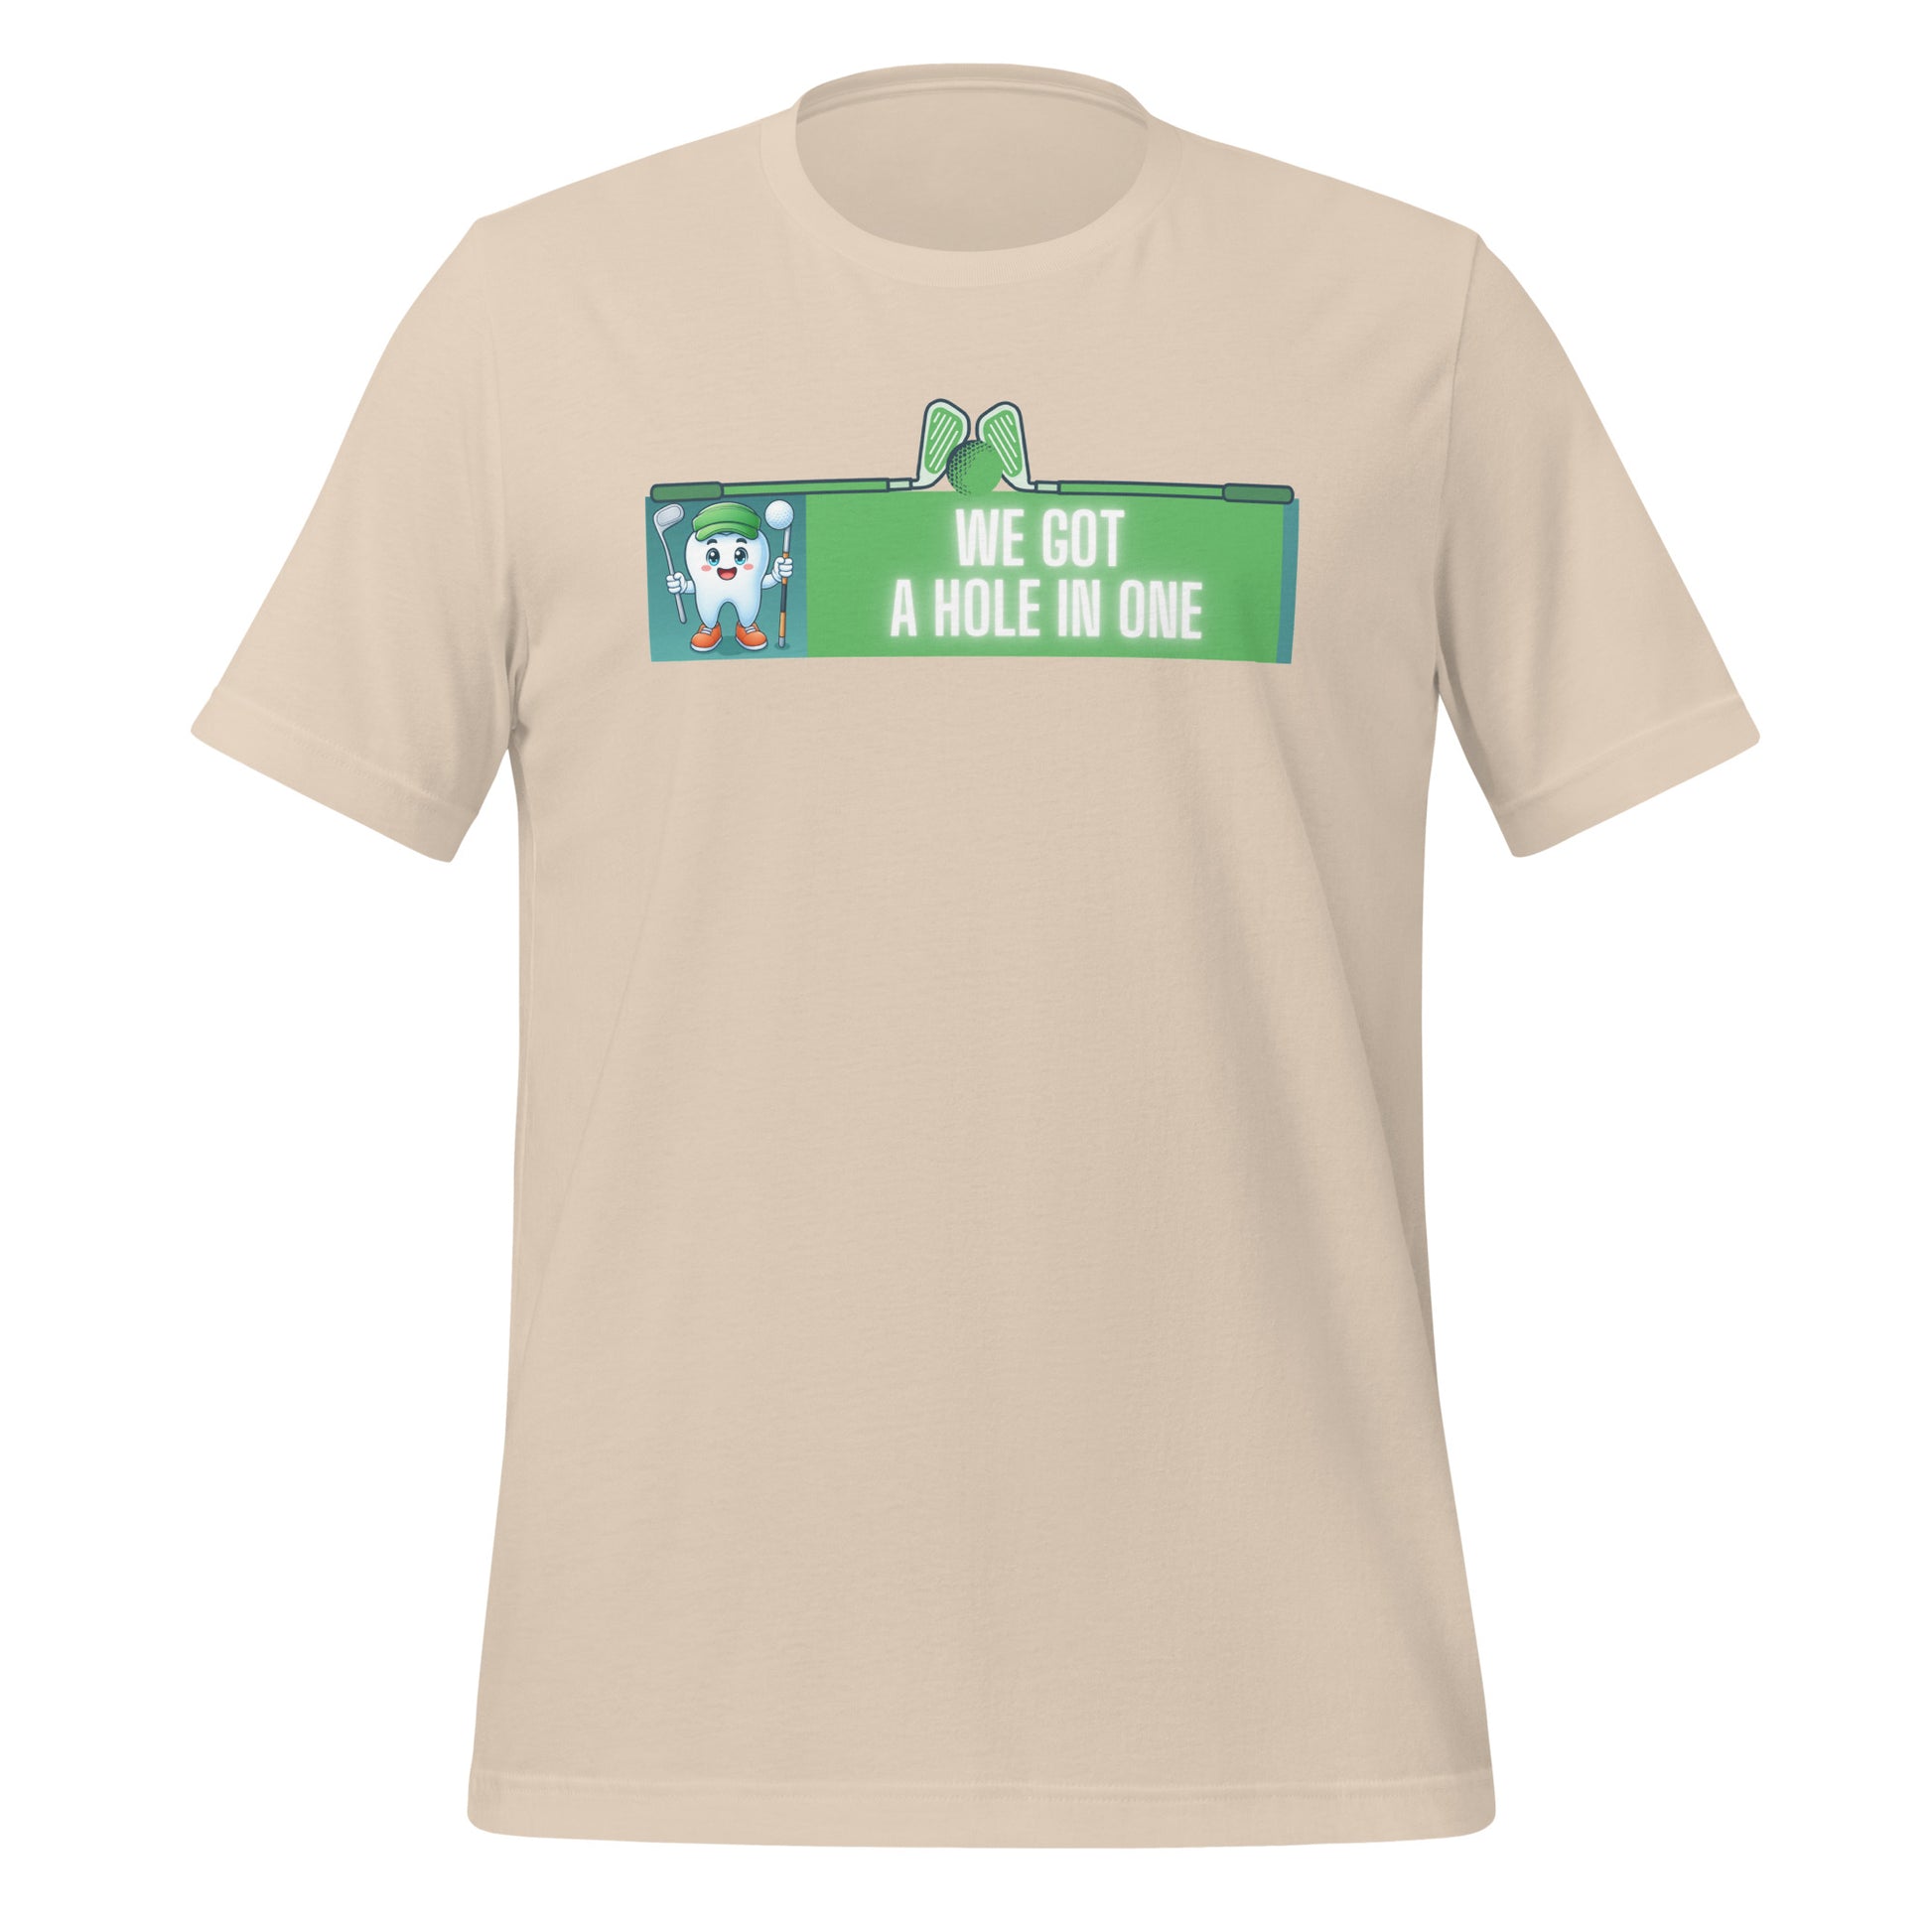 Cute dentist t-shirt showcasing an adorable tooth character in golf attire, joyfully celebrating a ‘hole in one’ achievement, perfect for dentist and dental professionals seeking unique and thematic dental apparel. Soft cream color, front view.